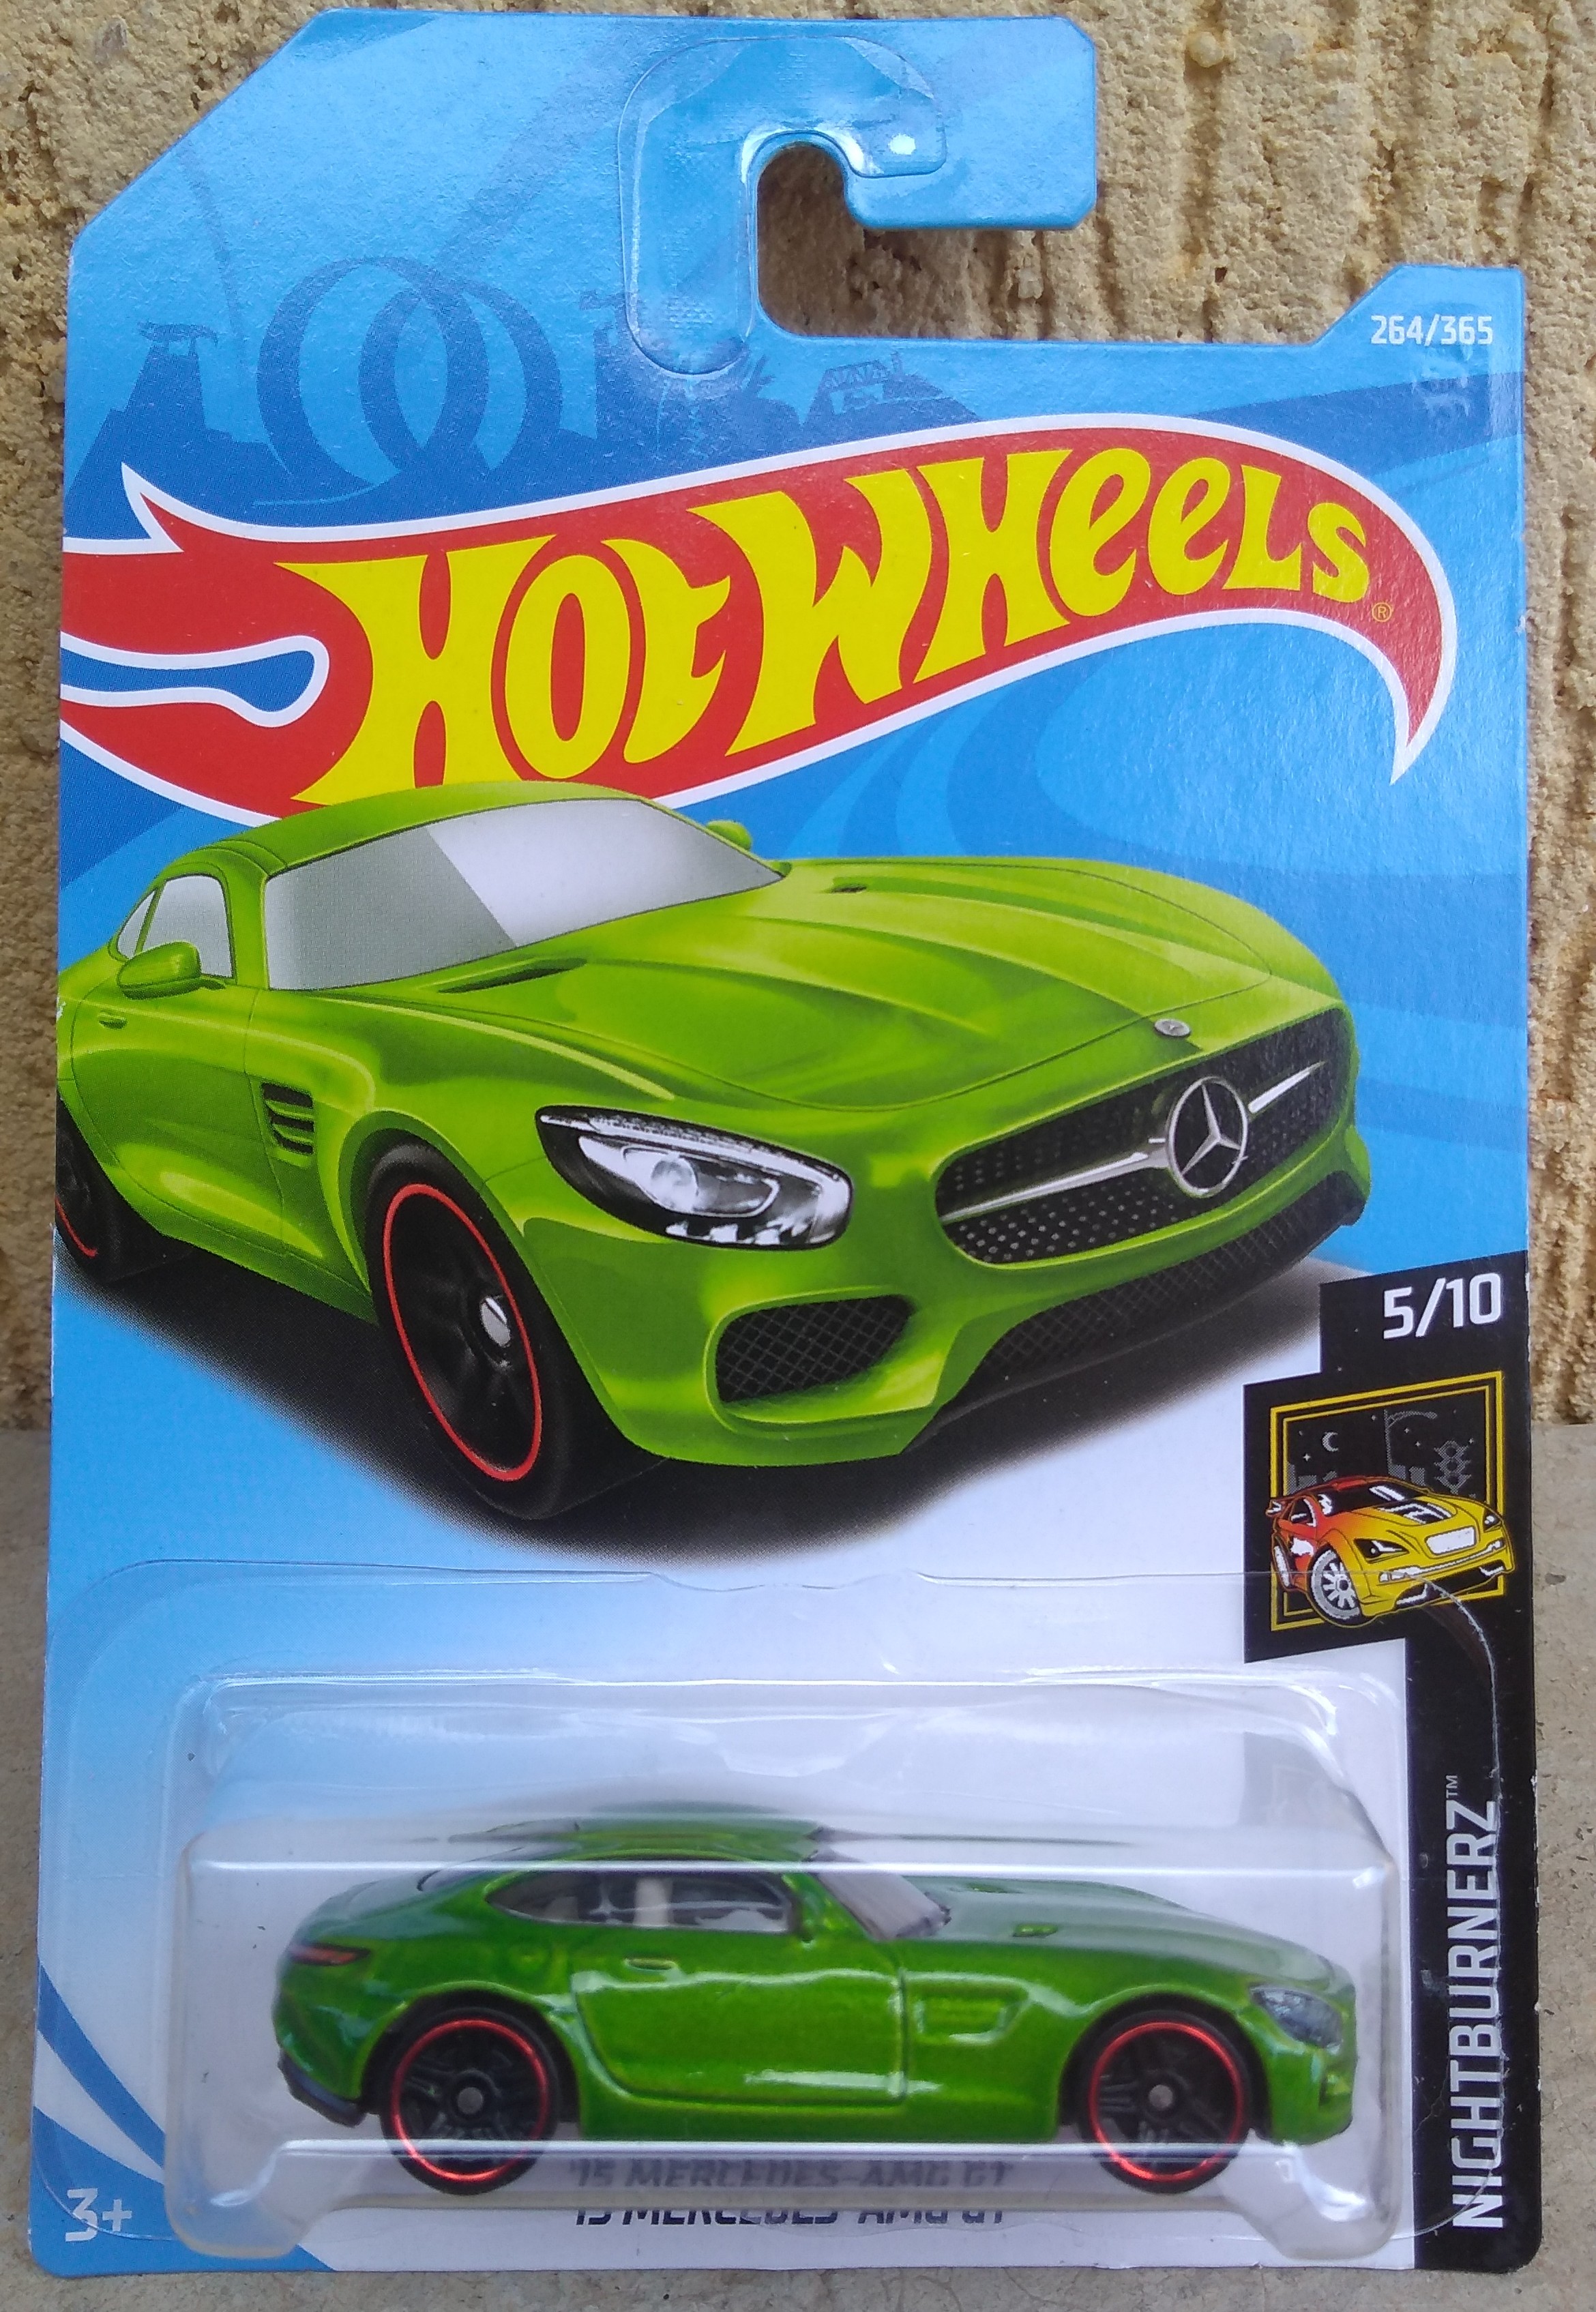 Details about   Hot Wheels 2017 # 256 New Models '15 Mercedes AMG GT Metallic Yellow  Lot of 10 